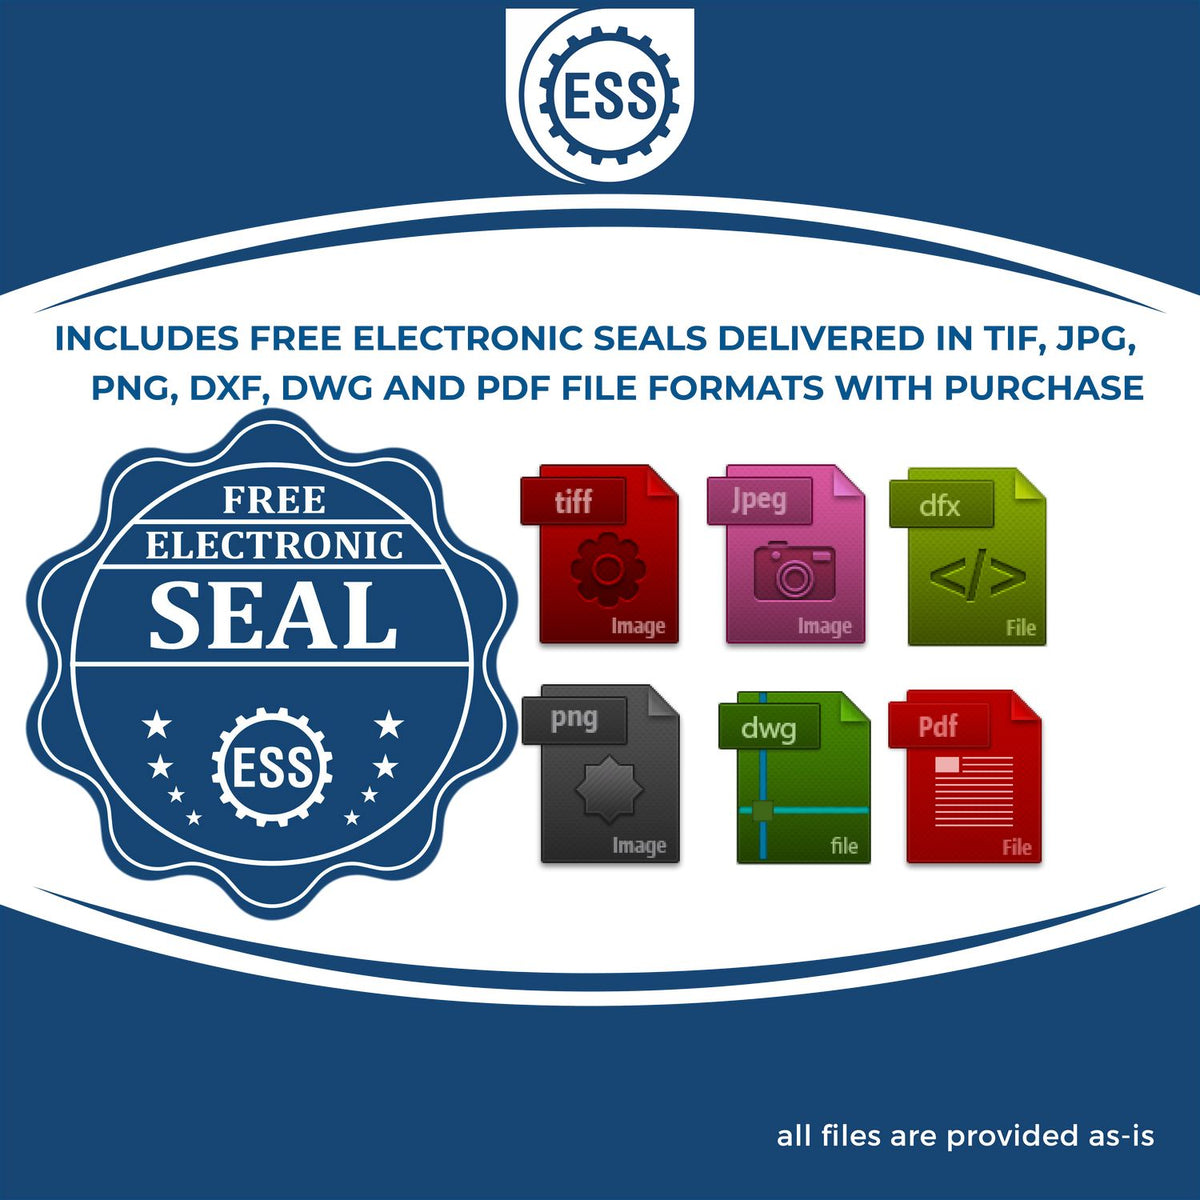 An infographic for the free electronic seal for the Heavy Duty Cast Iron New Hampshire Engineer Seal Embosser illustrating the different file type icons such as DXF, DWG, TIF, JPG and PNG.